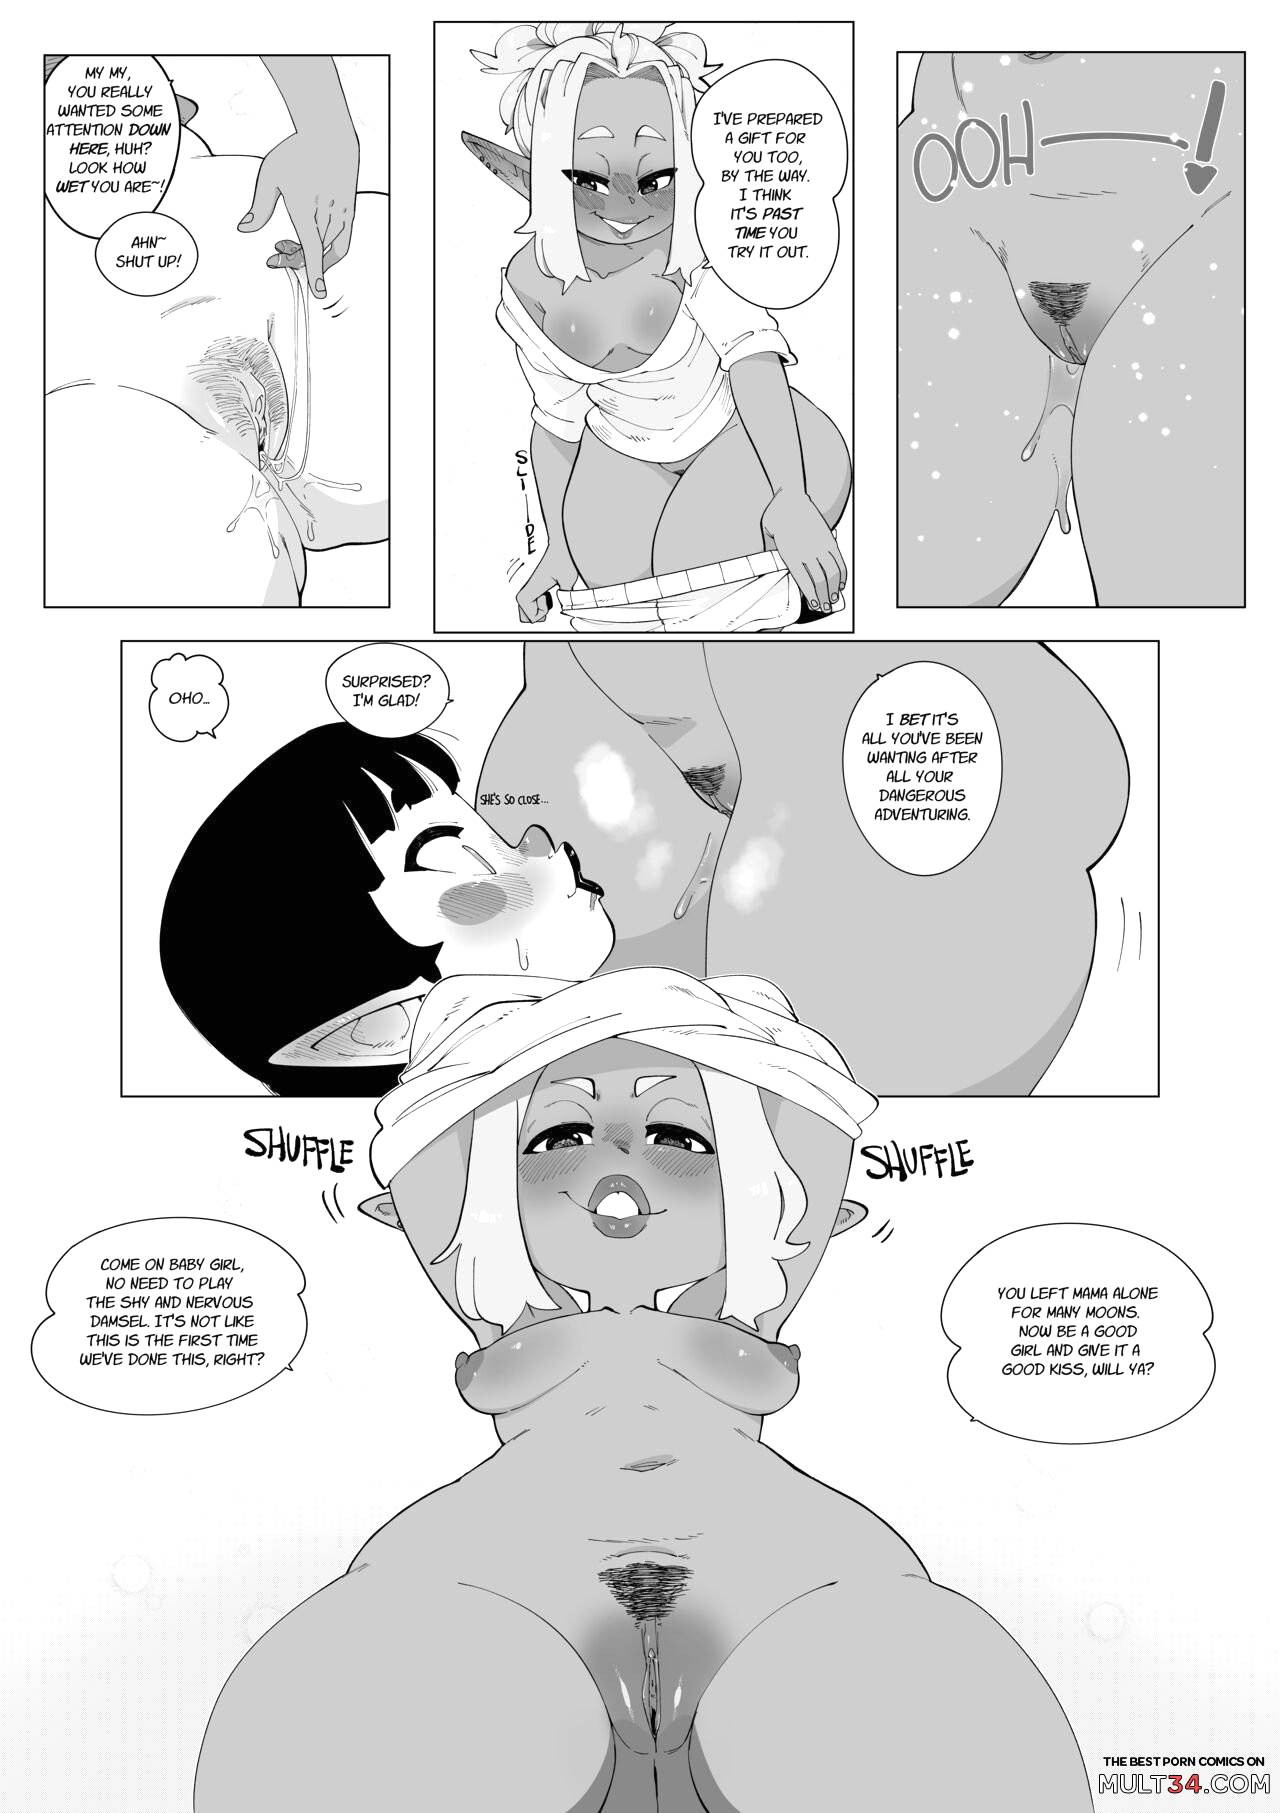 Coming Home page 14